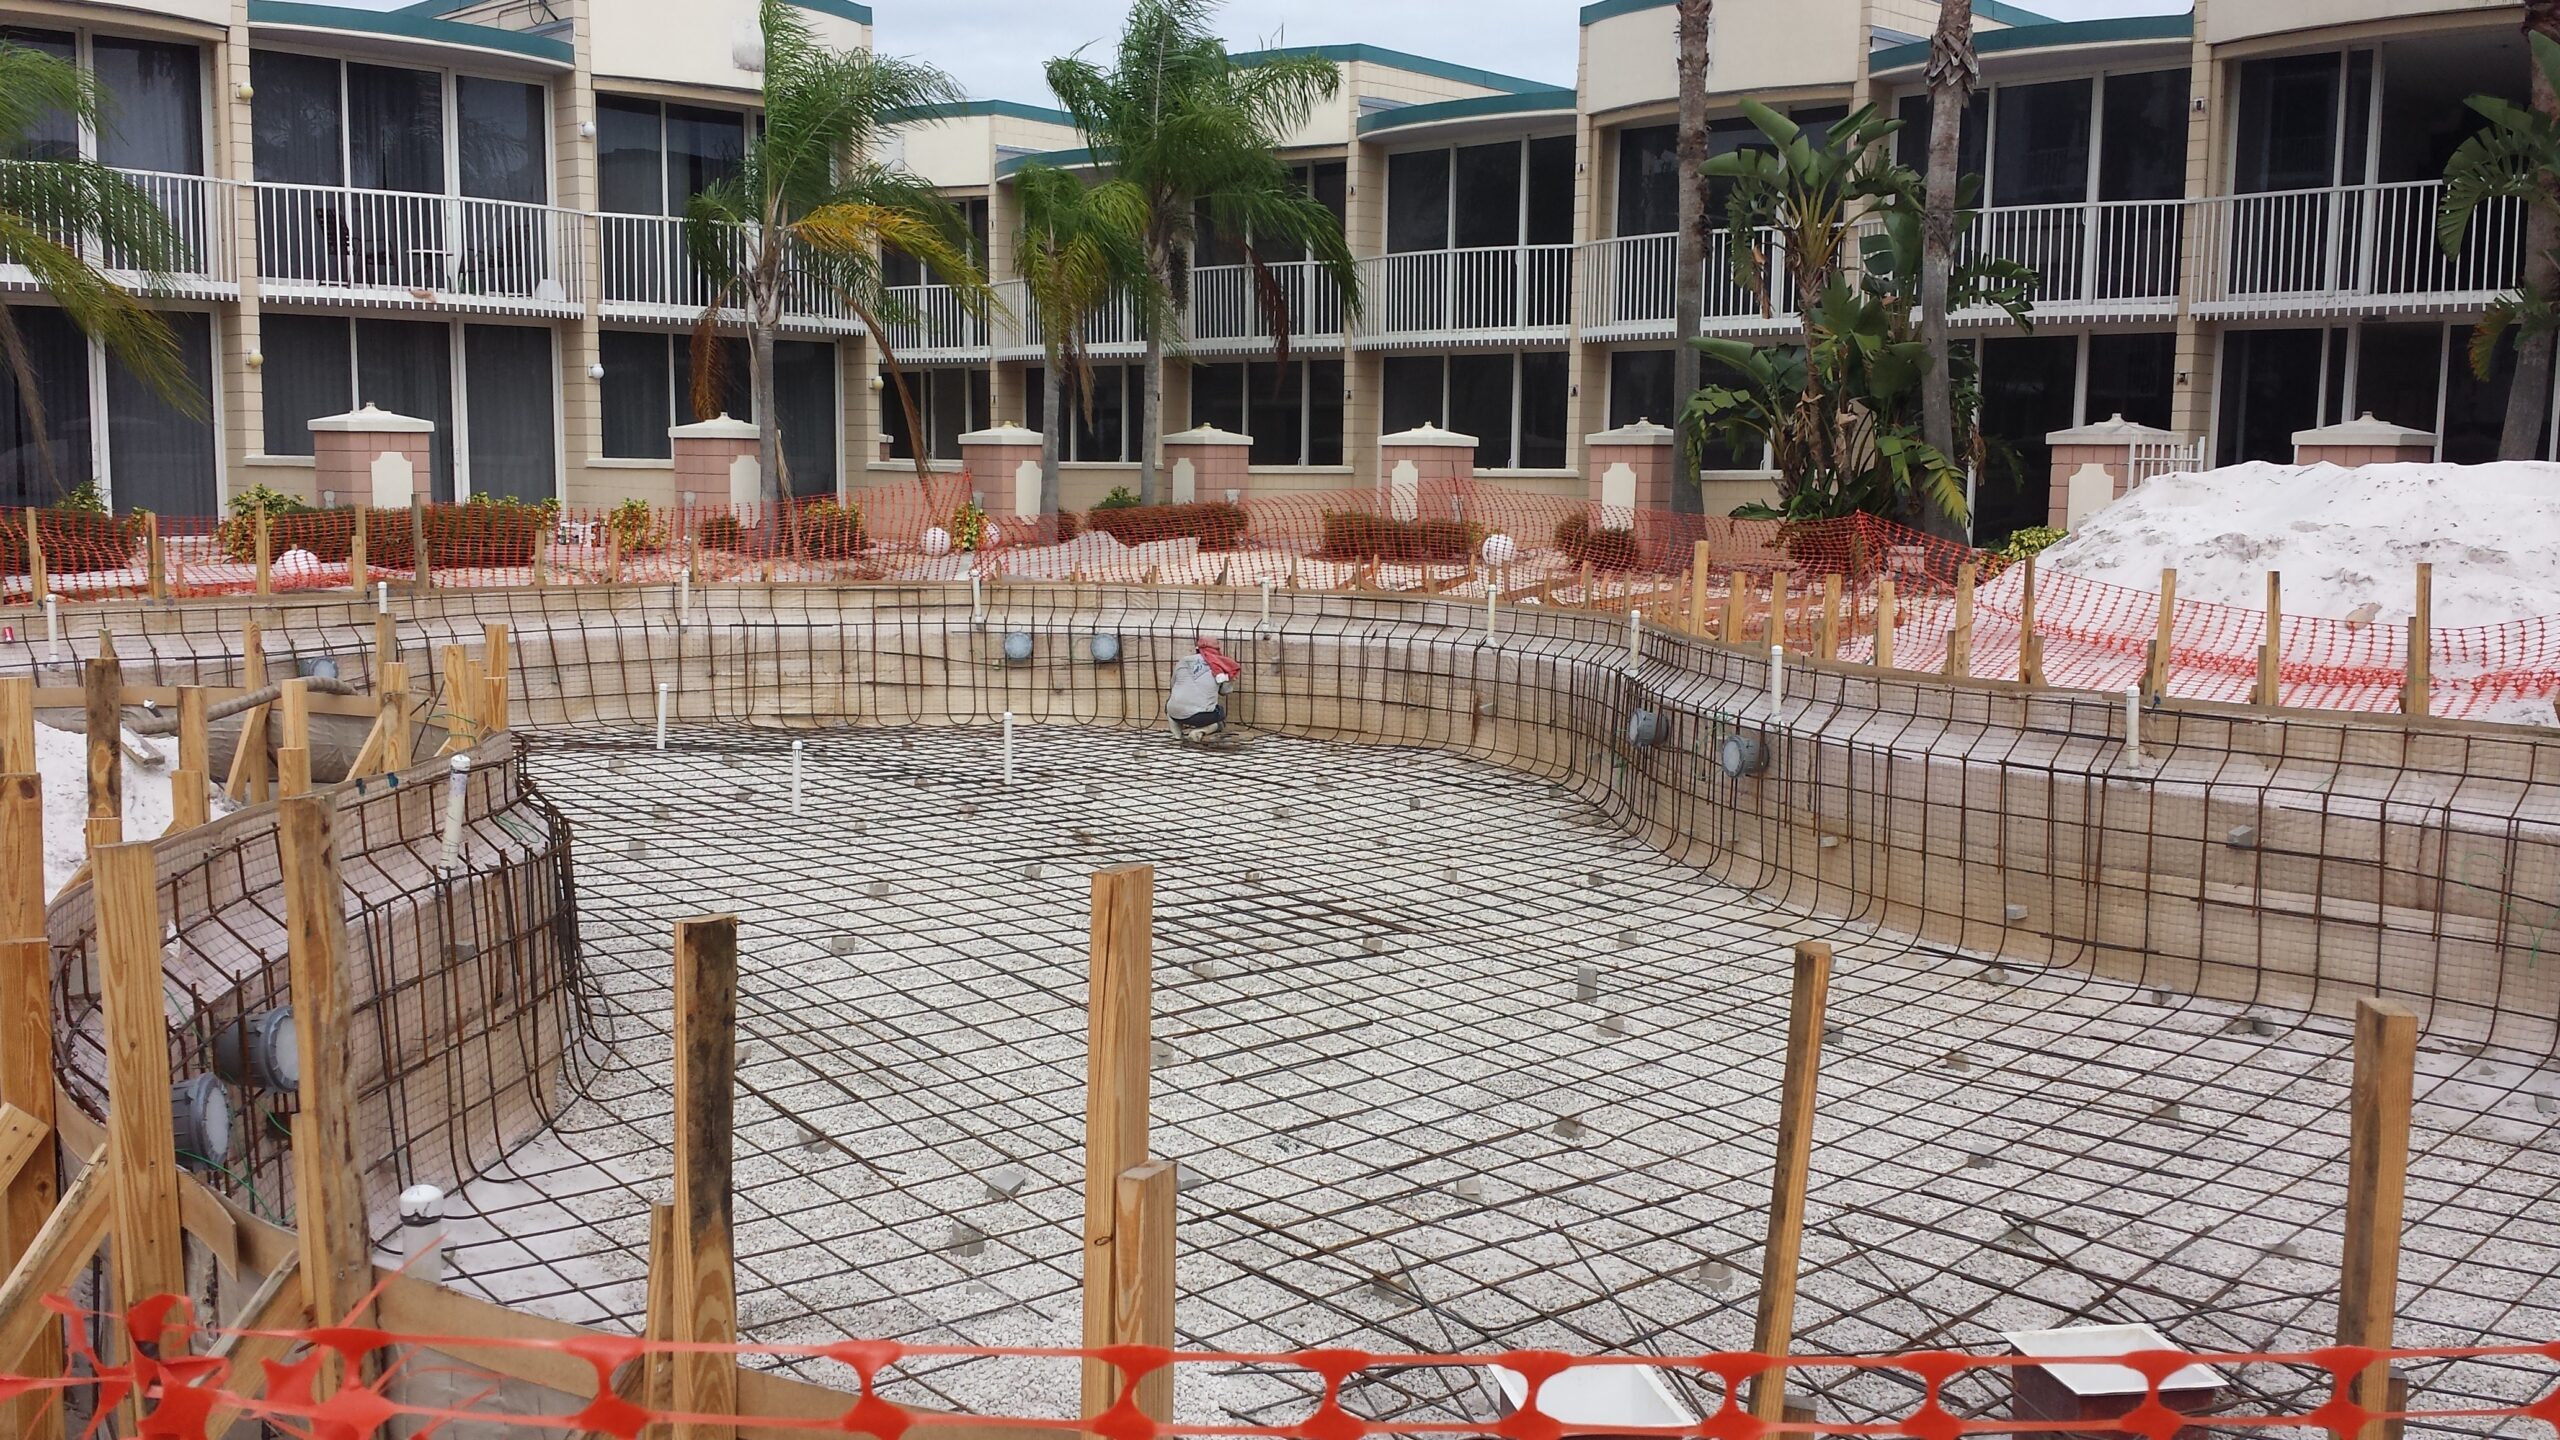 A huge pool being built with metal bars and cement